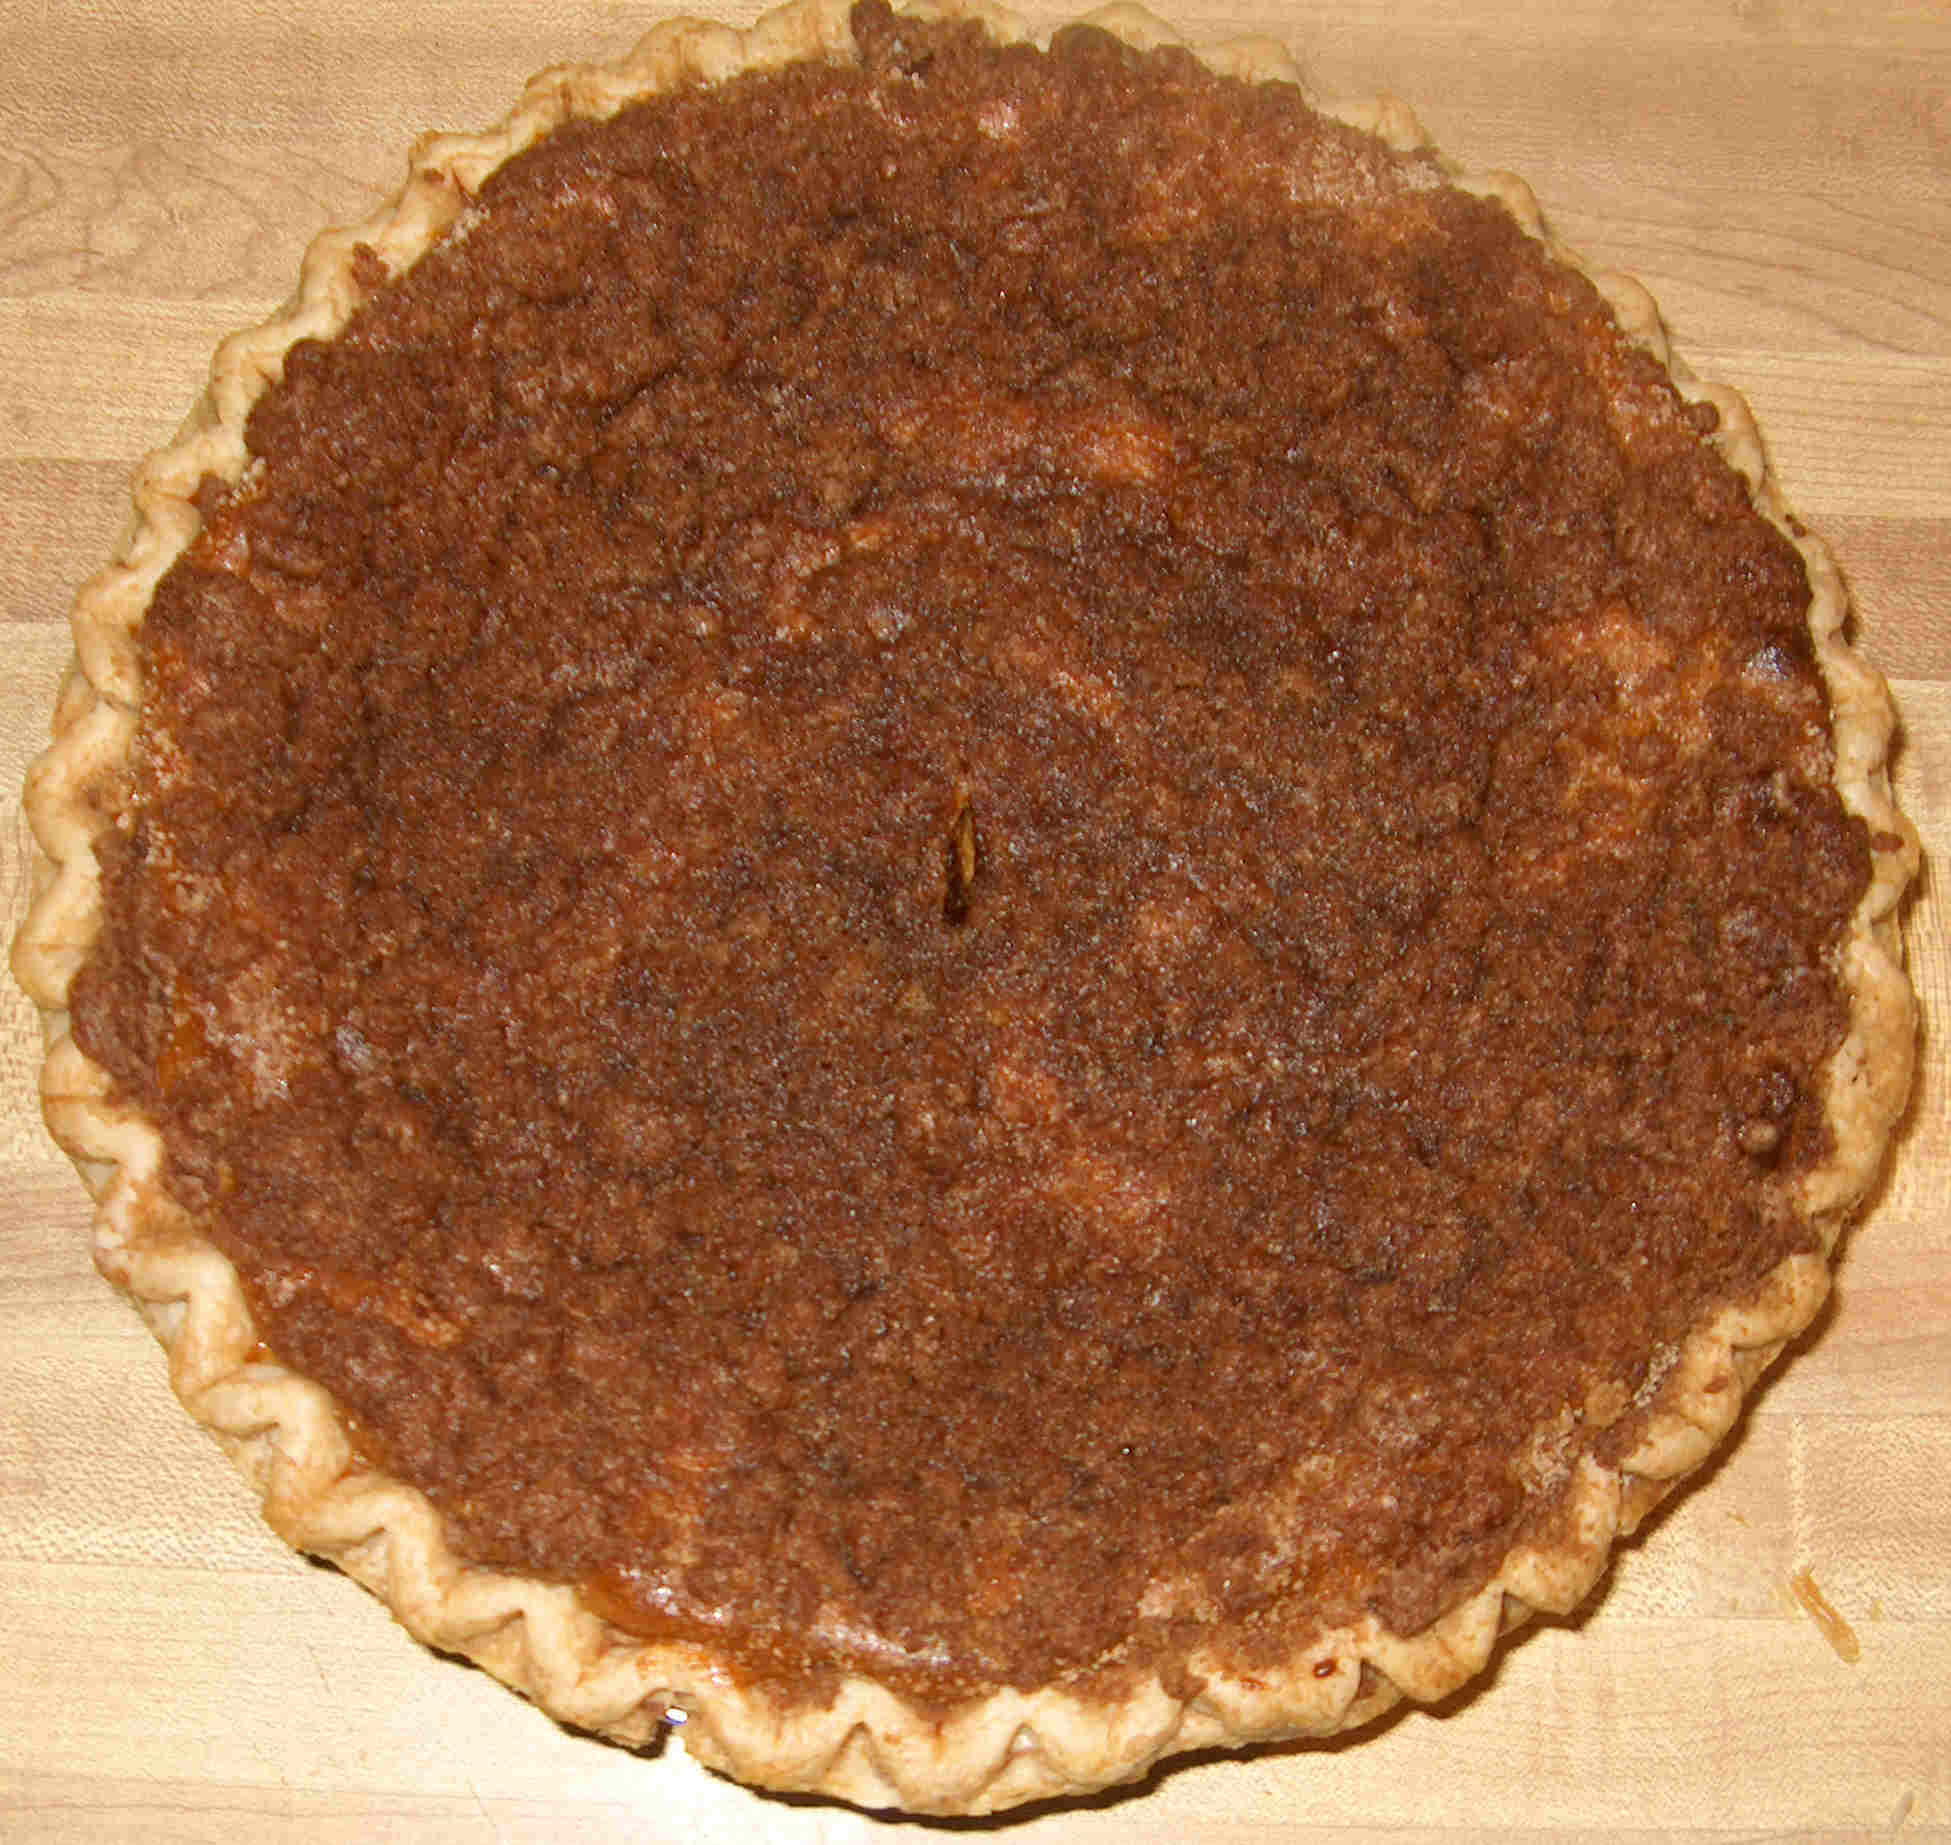 PUMPKIN PIE WITH STREUSEL TOPPING